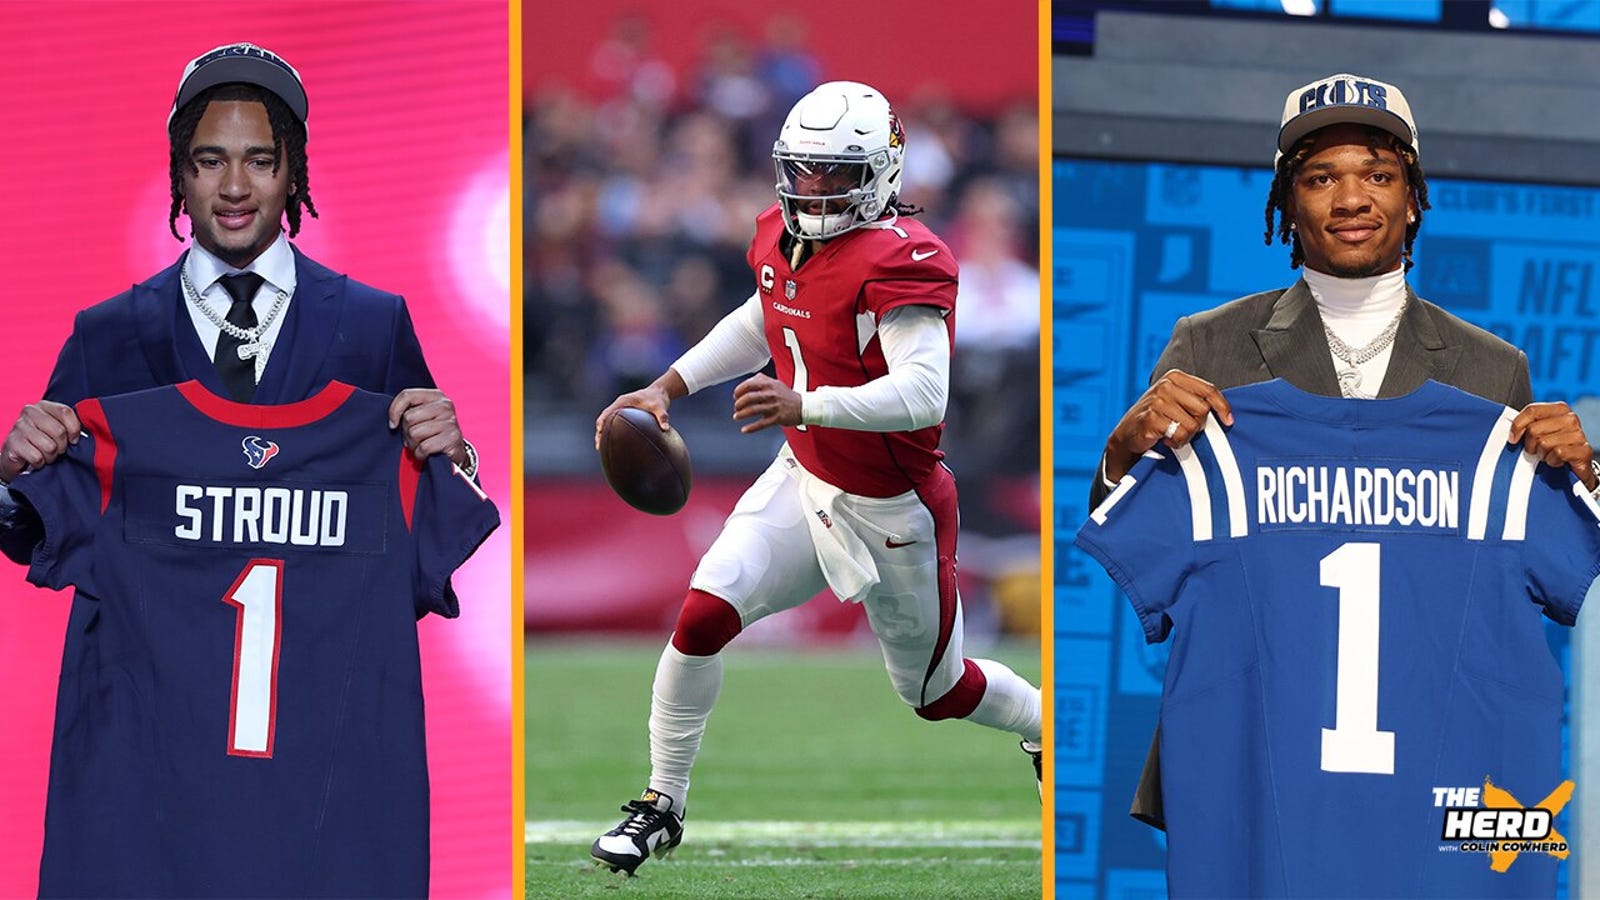 Take the over or under on Texans, Cardinals, Colts win totals? 